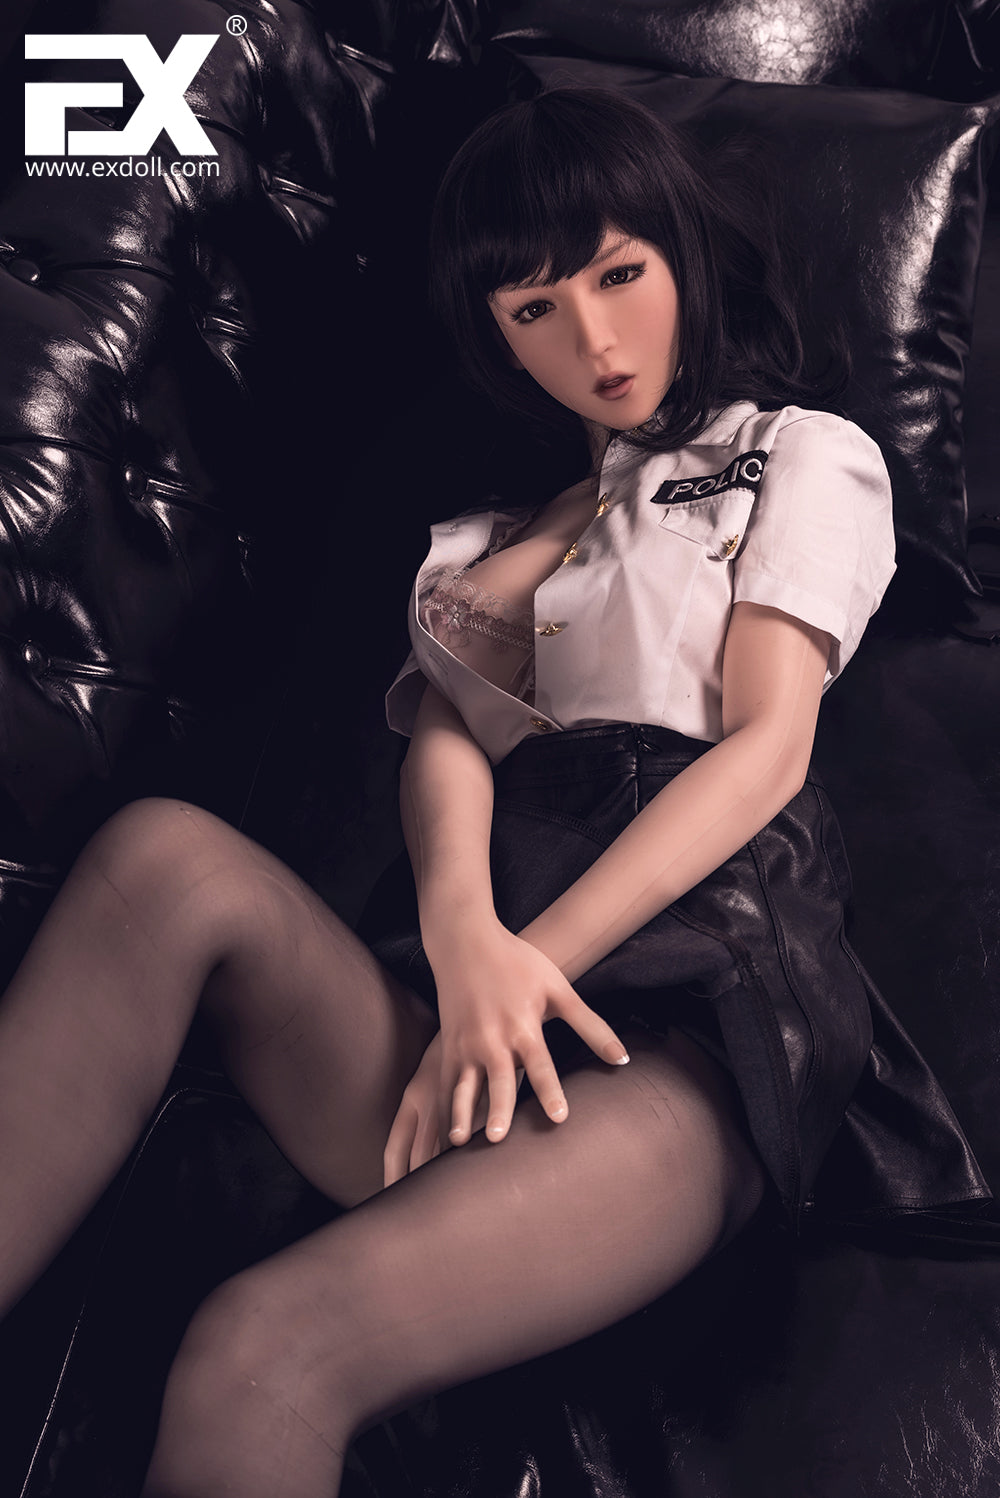 EX Doll Ukiyoe Series 170 cm Silicone - Seung Hee | Sex Dolls SG